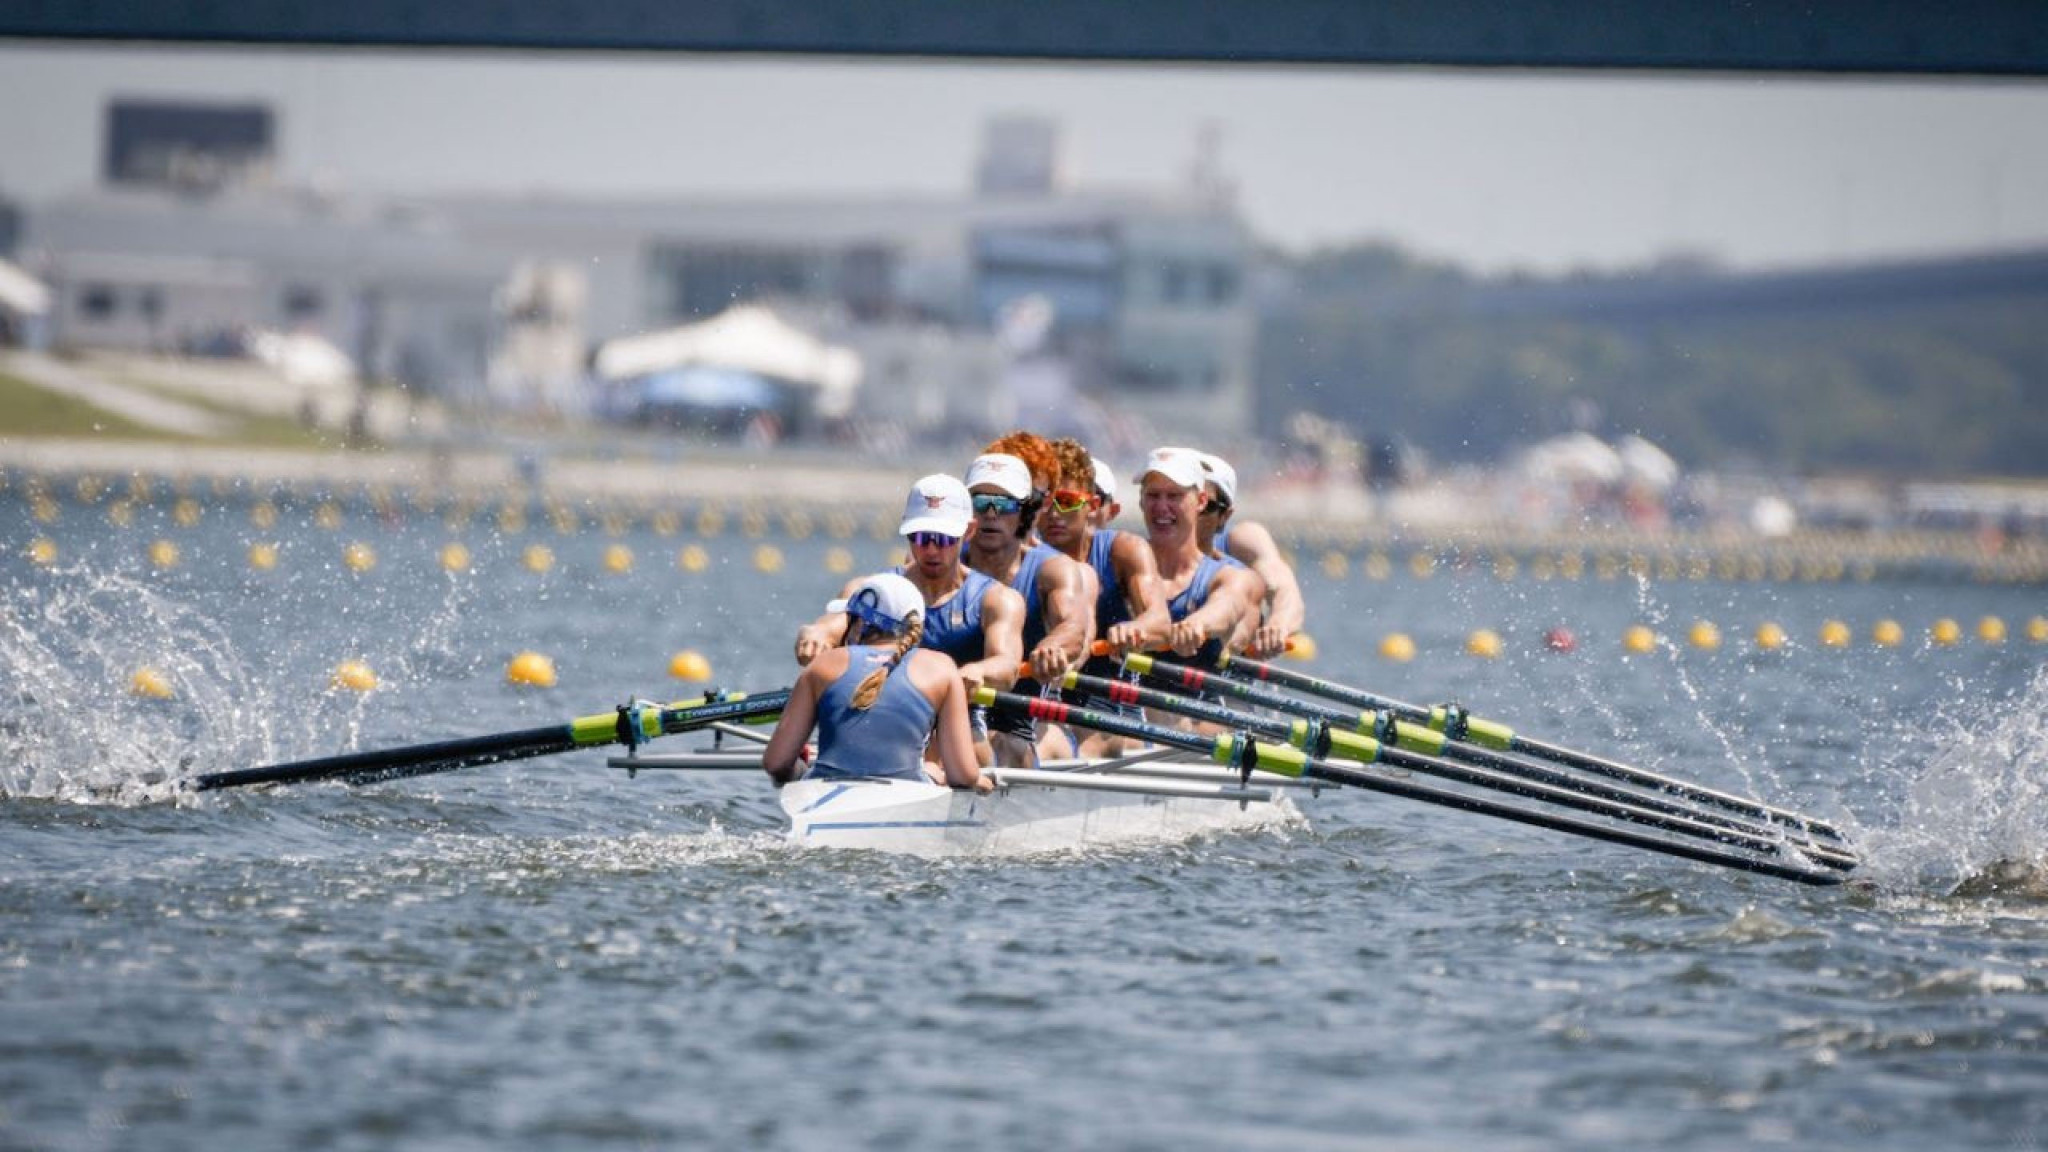 Three United States crews qualified for their respective World Rowing Junior Championships finals on the third day of competition in Tokyo ©US Rowing